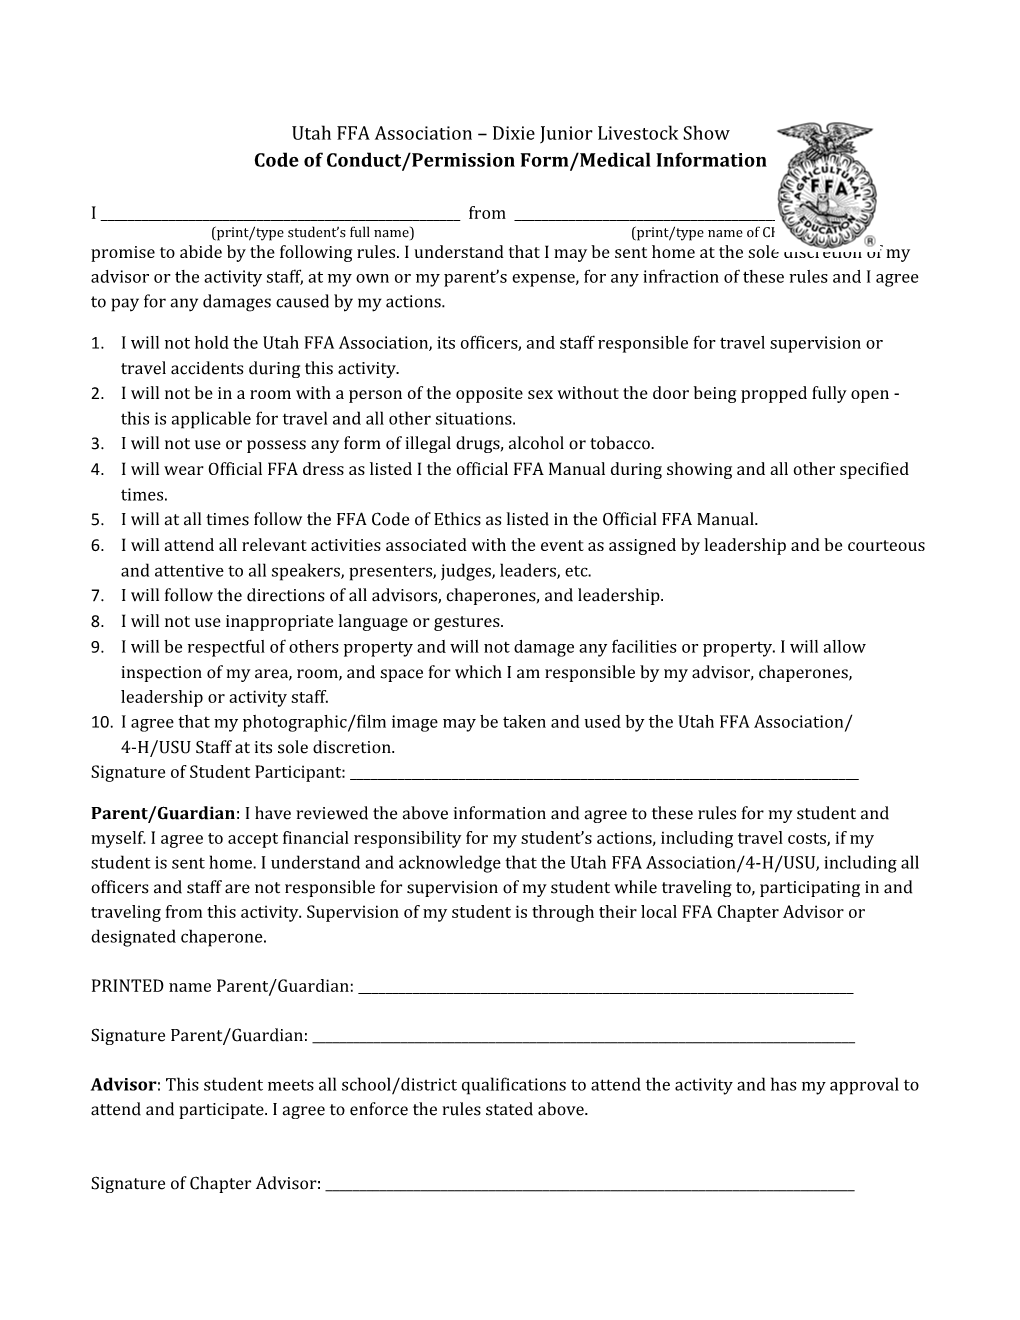 Code of Conduct/Permission Form/Medical Information